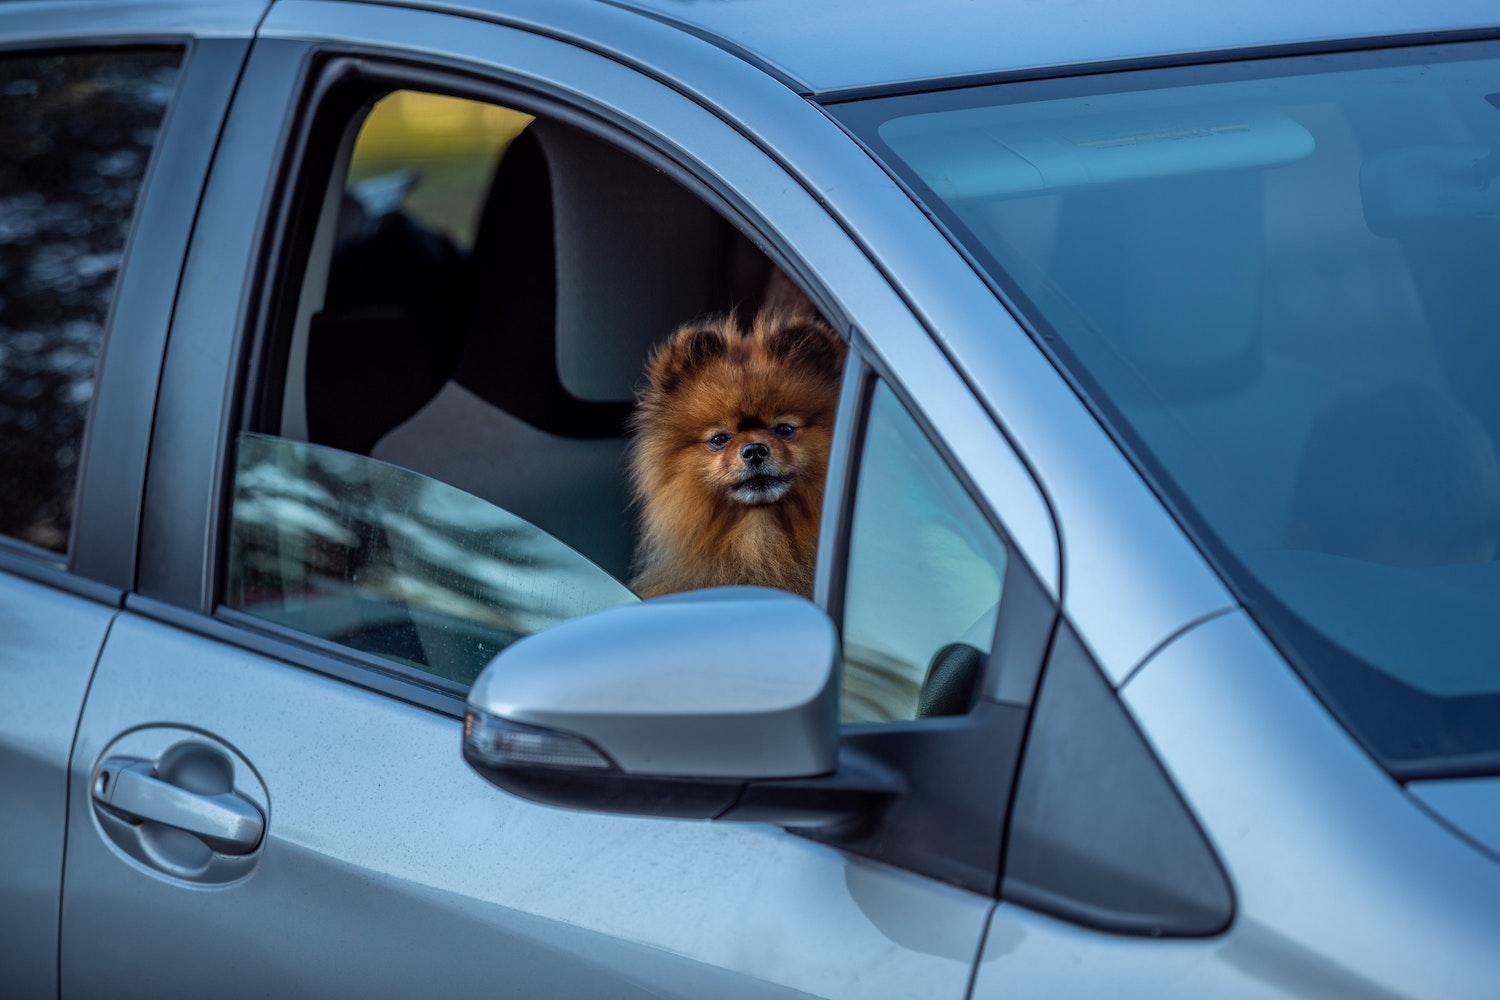 unrestrained dog in car